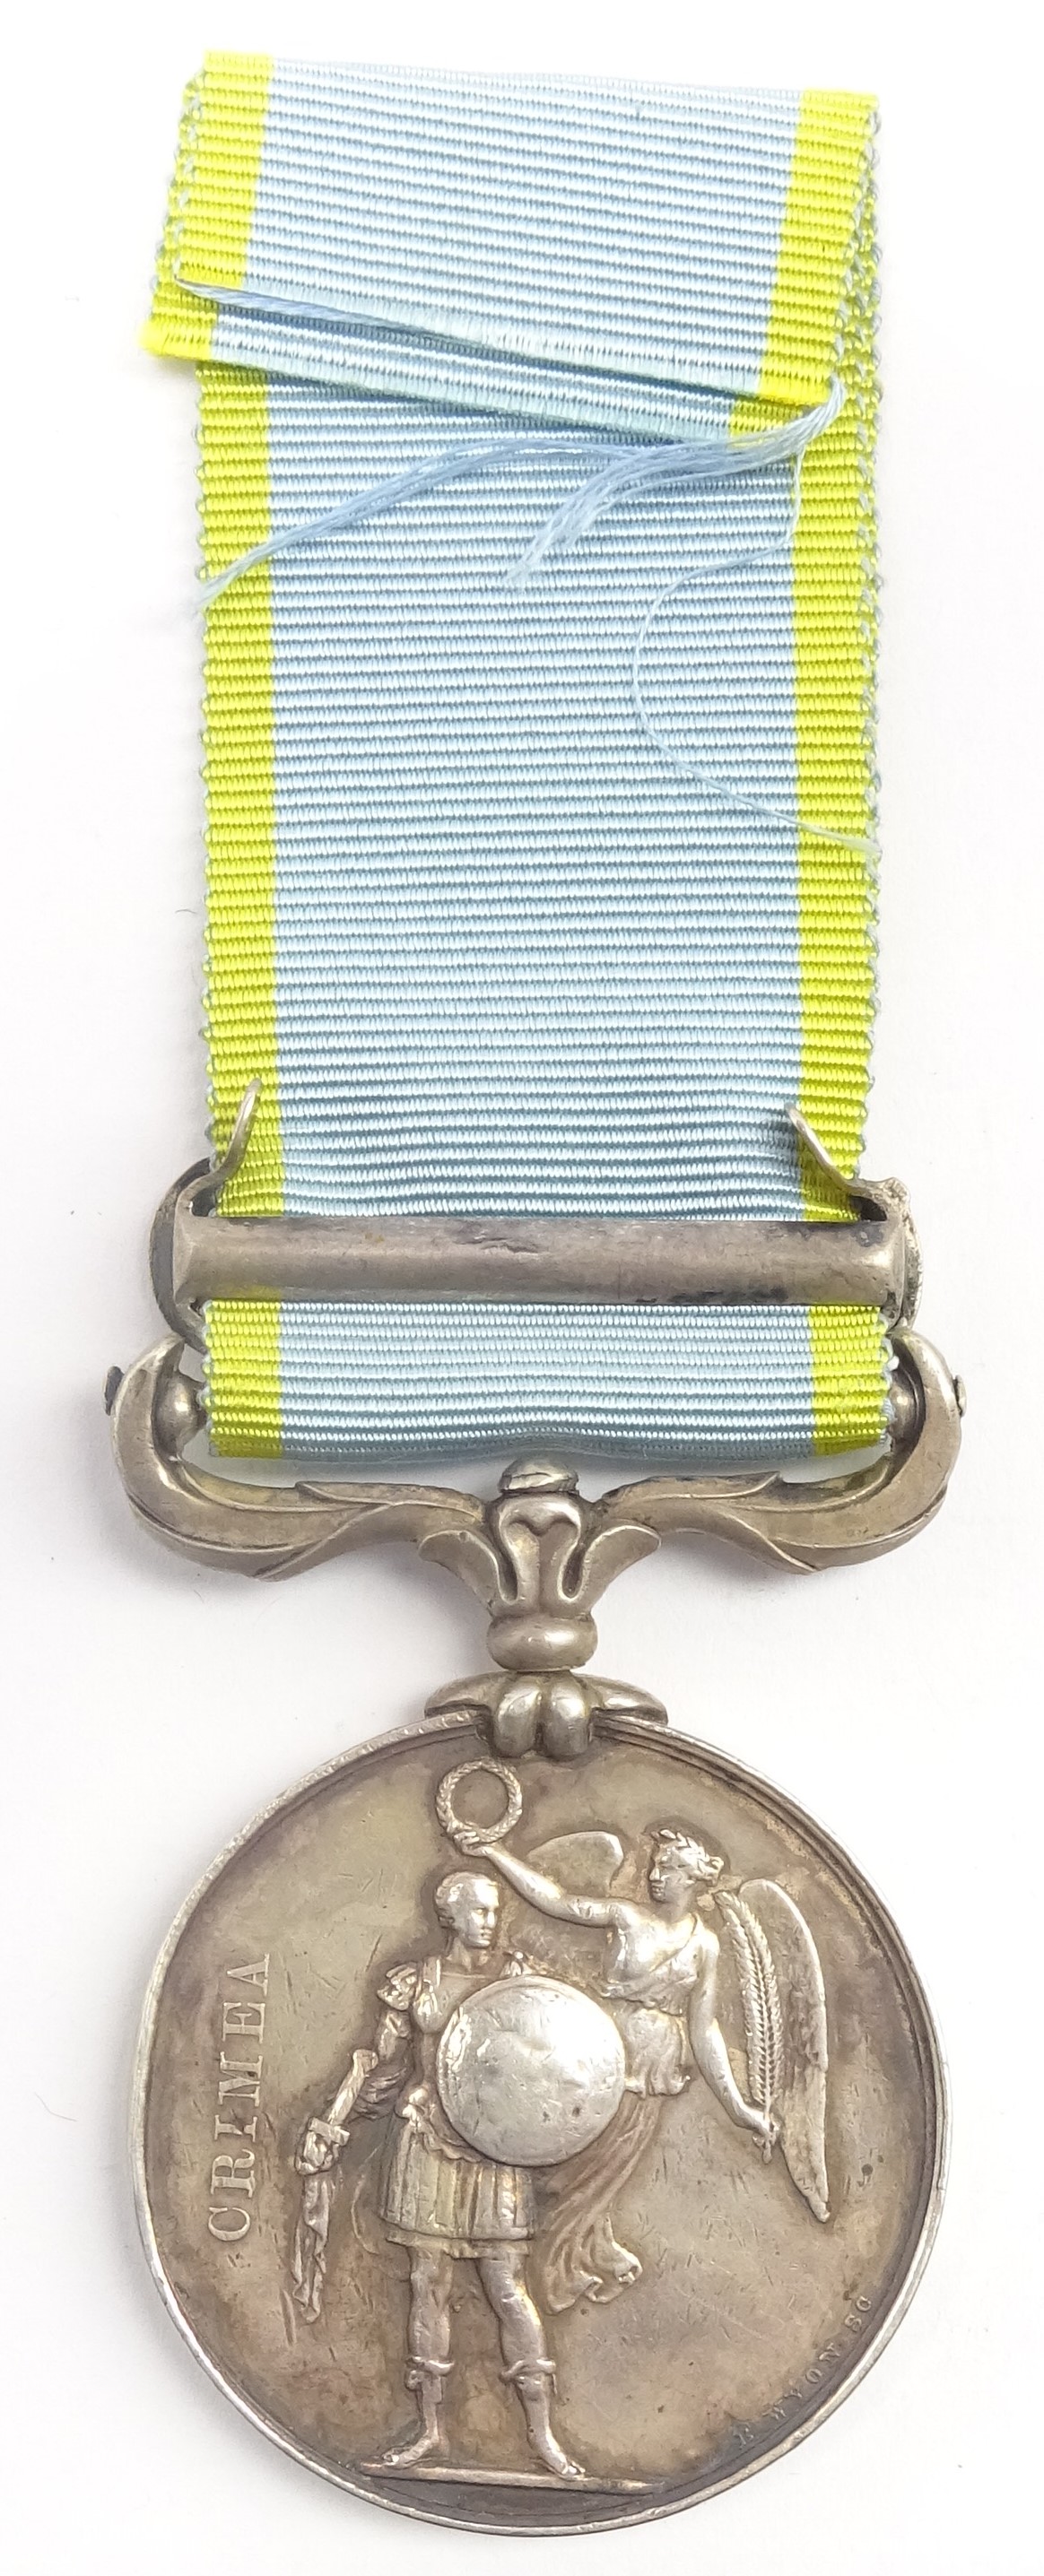 Victorian Crimea medal awarded to G. Rideout Gr. Rl. Horse Arty. - Image 2 of 3